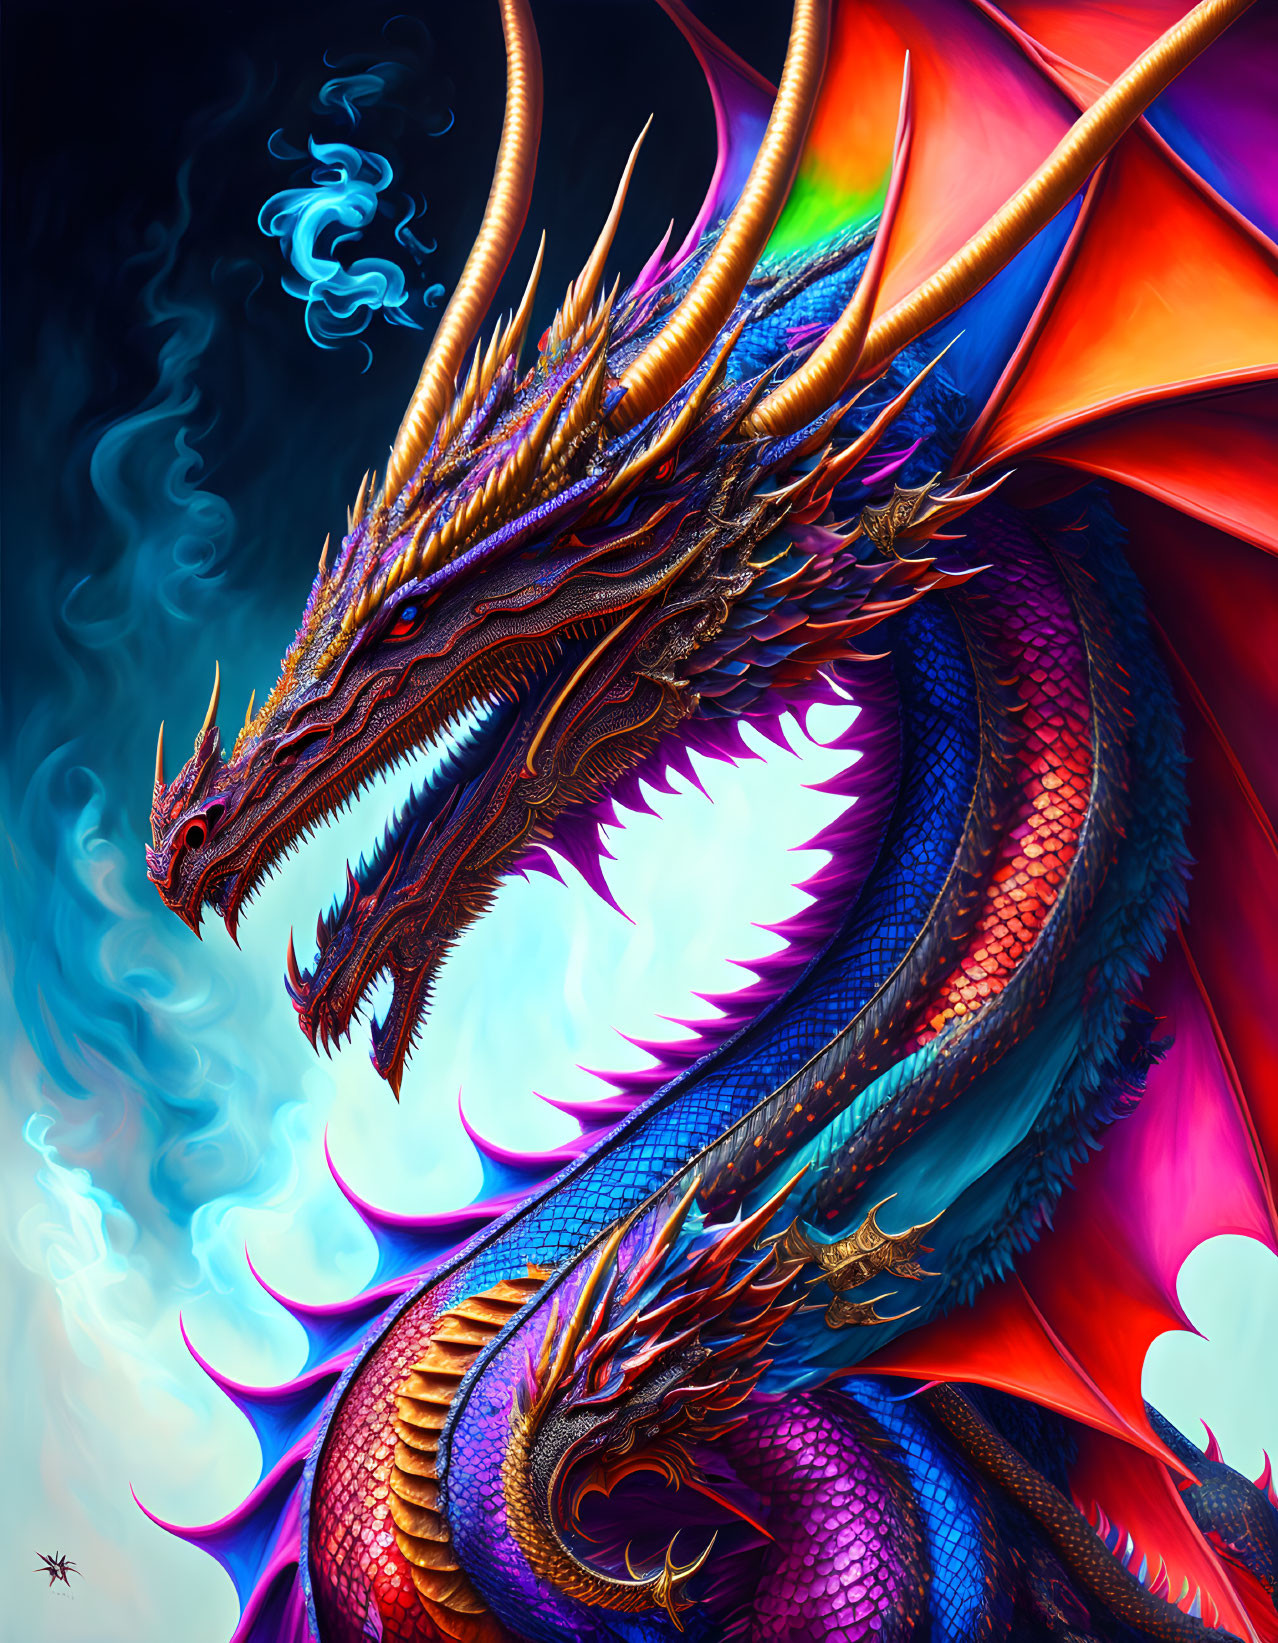 Detailed dragon illustration with iridescent scales and large wings against cloudy sky.